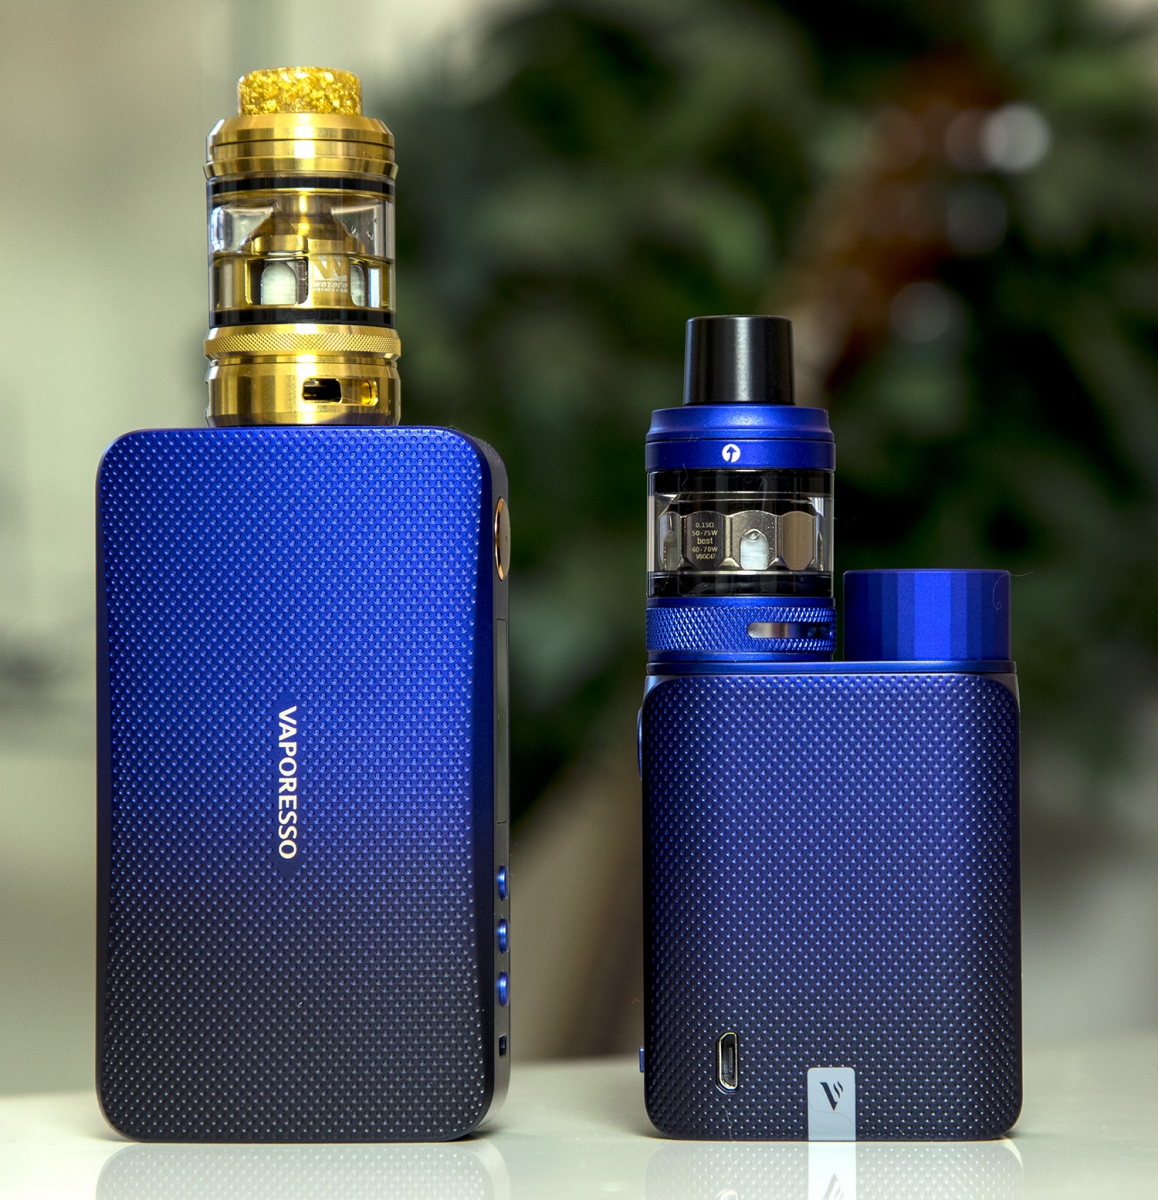 Vaporesso Swag 2 front and back